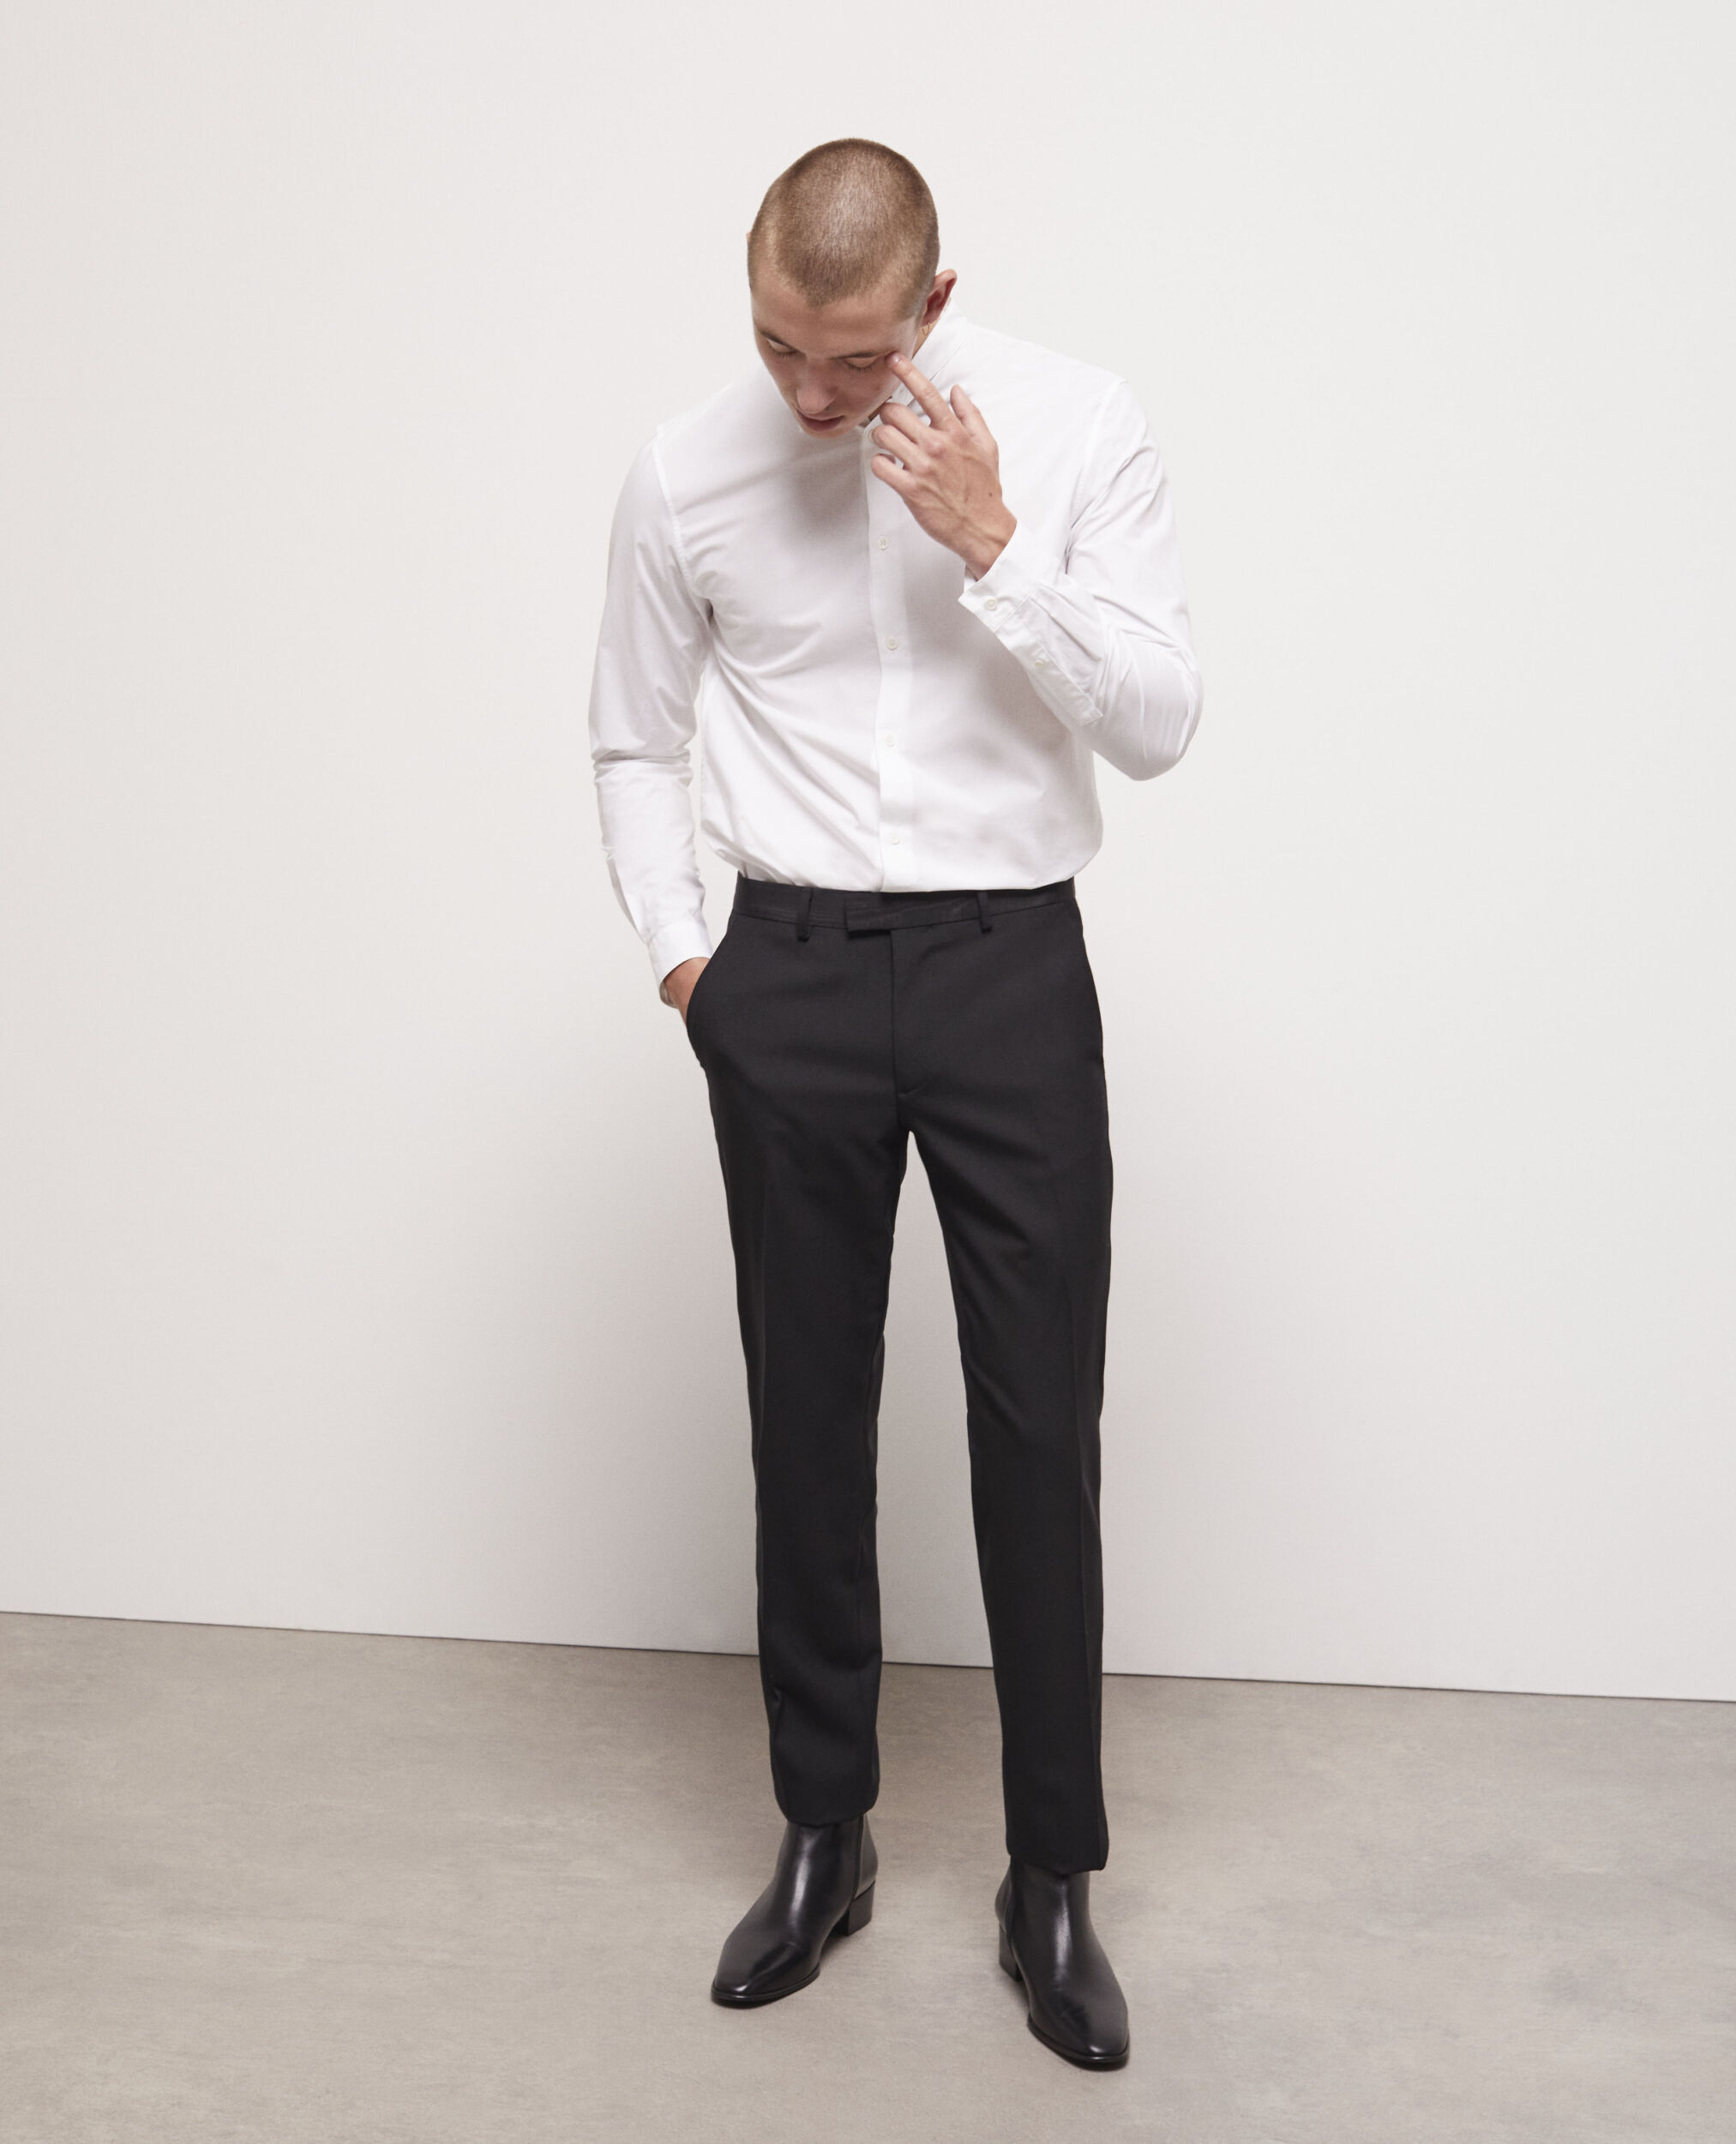 Cuffed Pants Or No? To Cuff Or Not To Cuff... | Berle